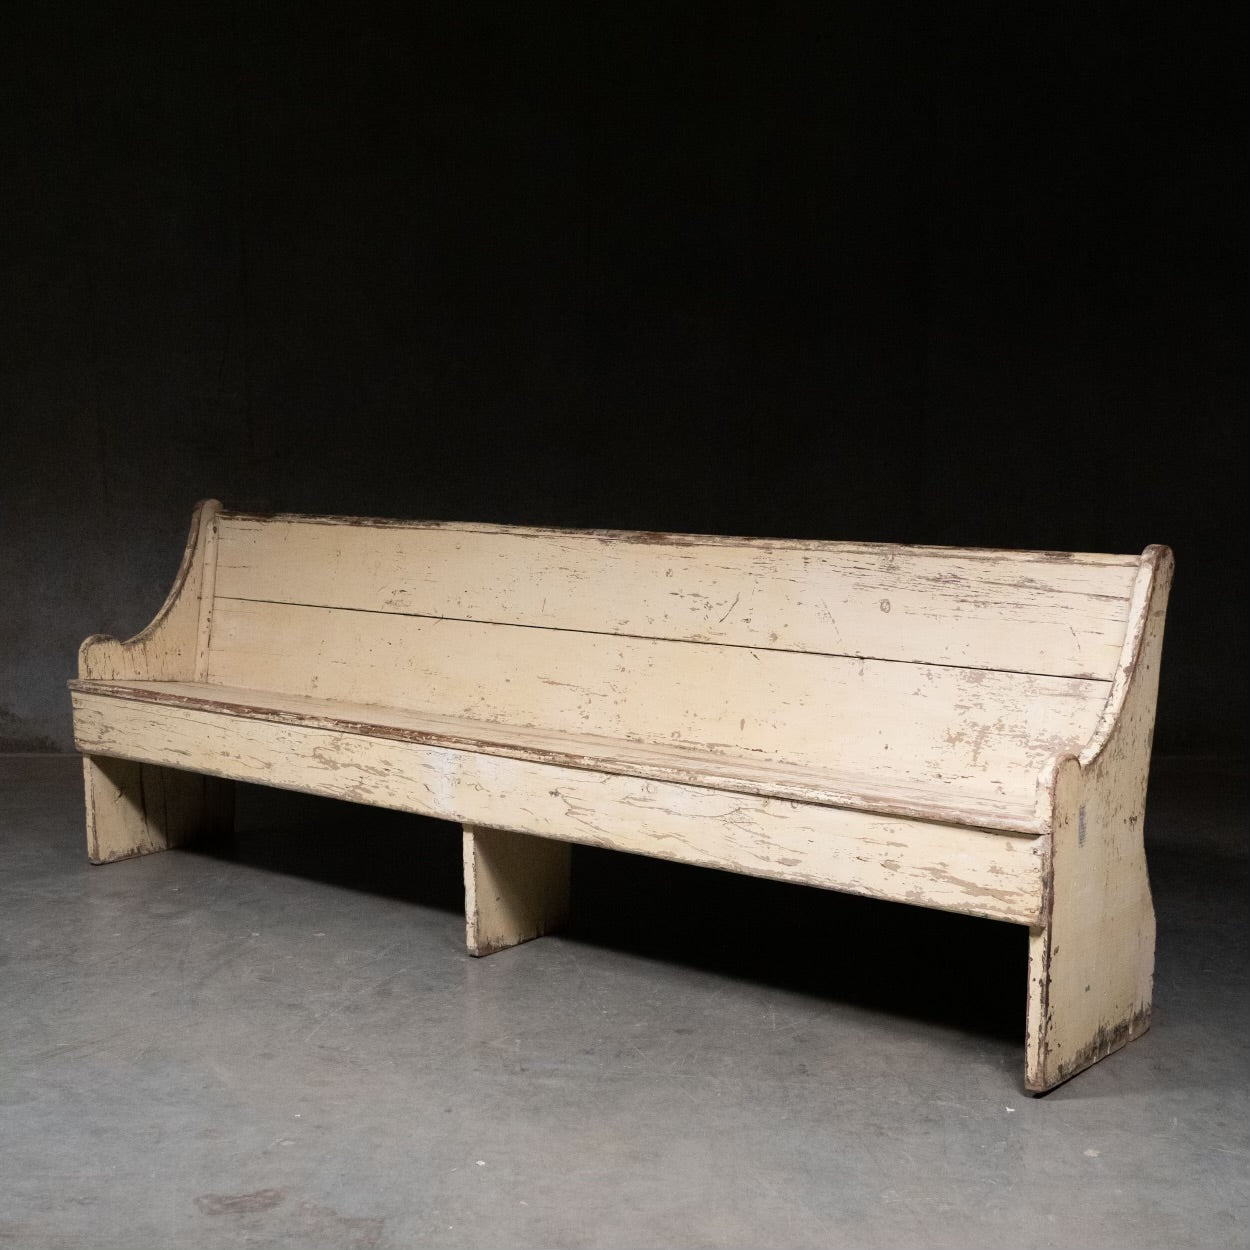 C1900.  Pine country porch bench